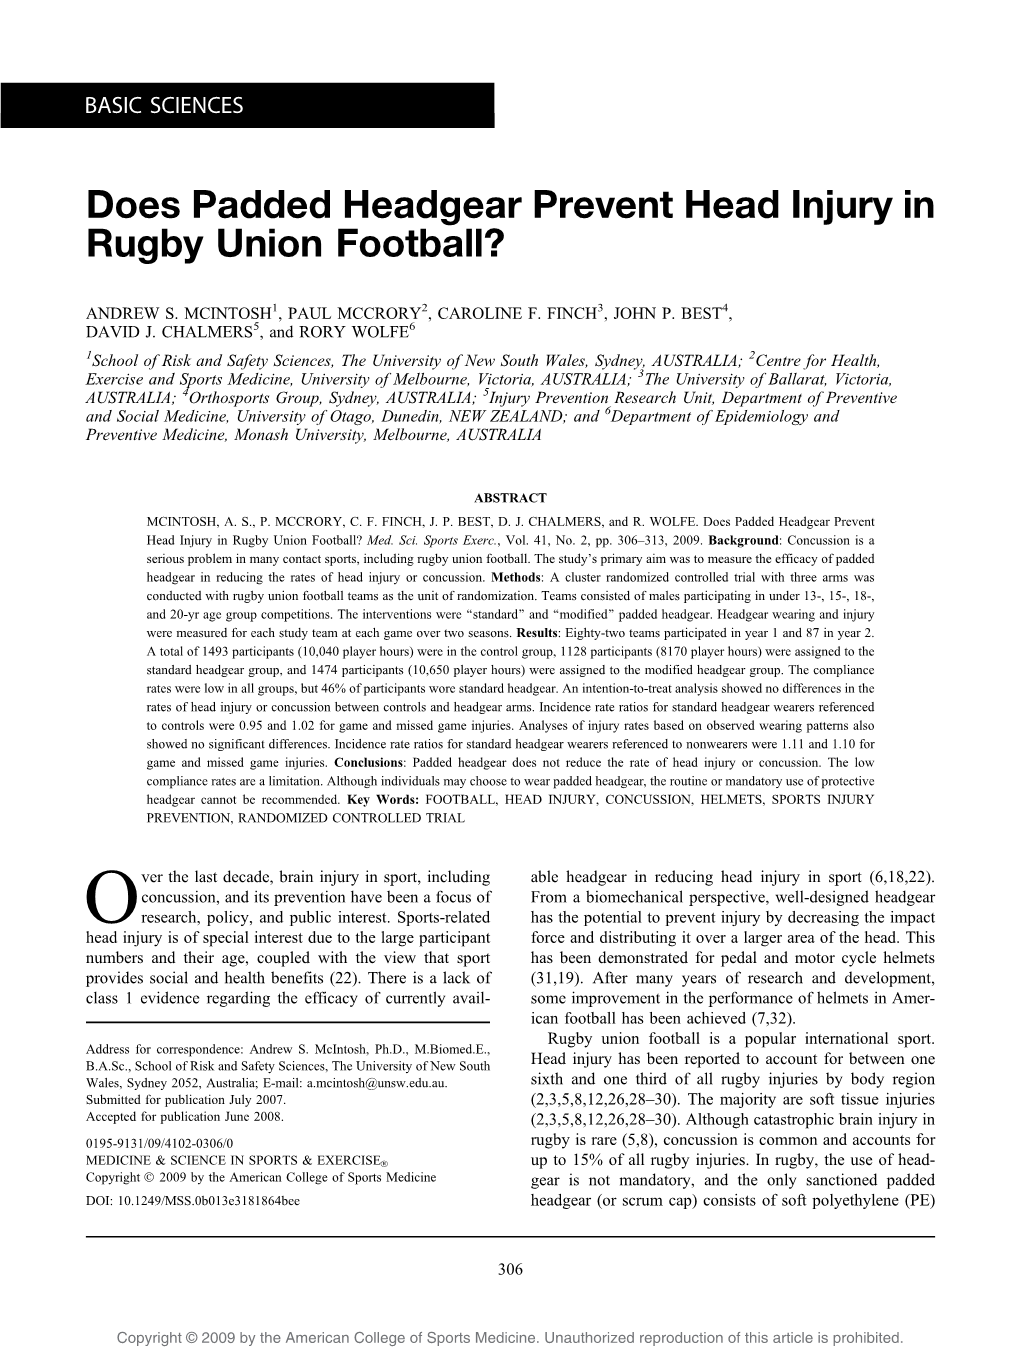 Does Padded Headgear Prevent Head Injury in Rugby Union Football?